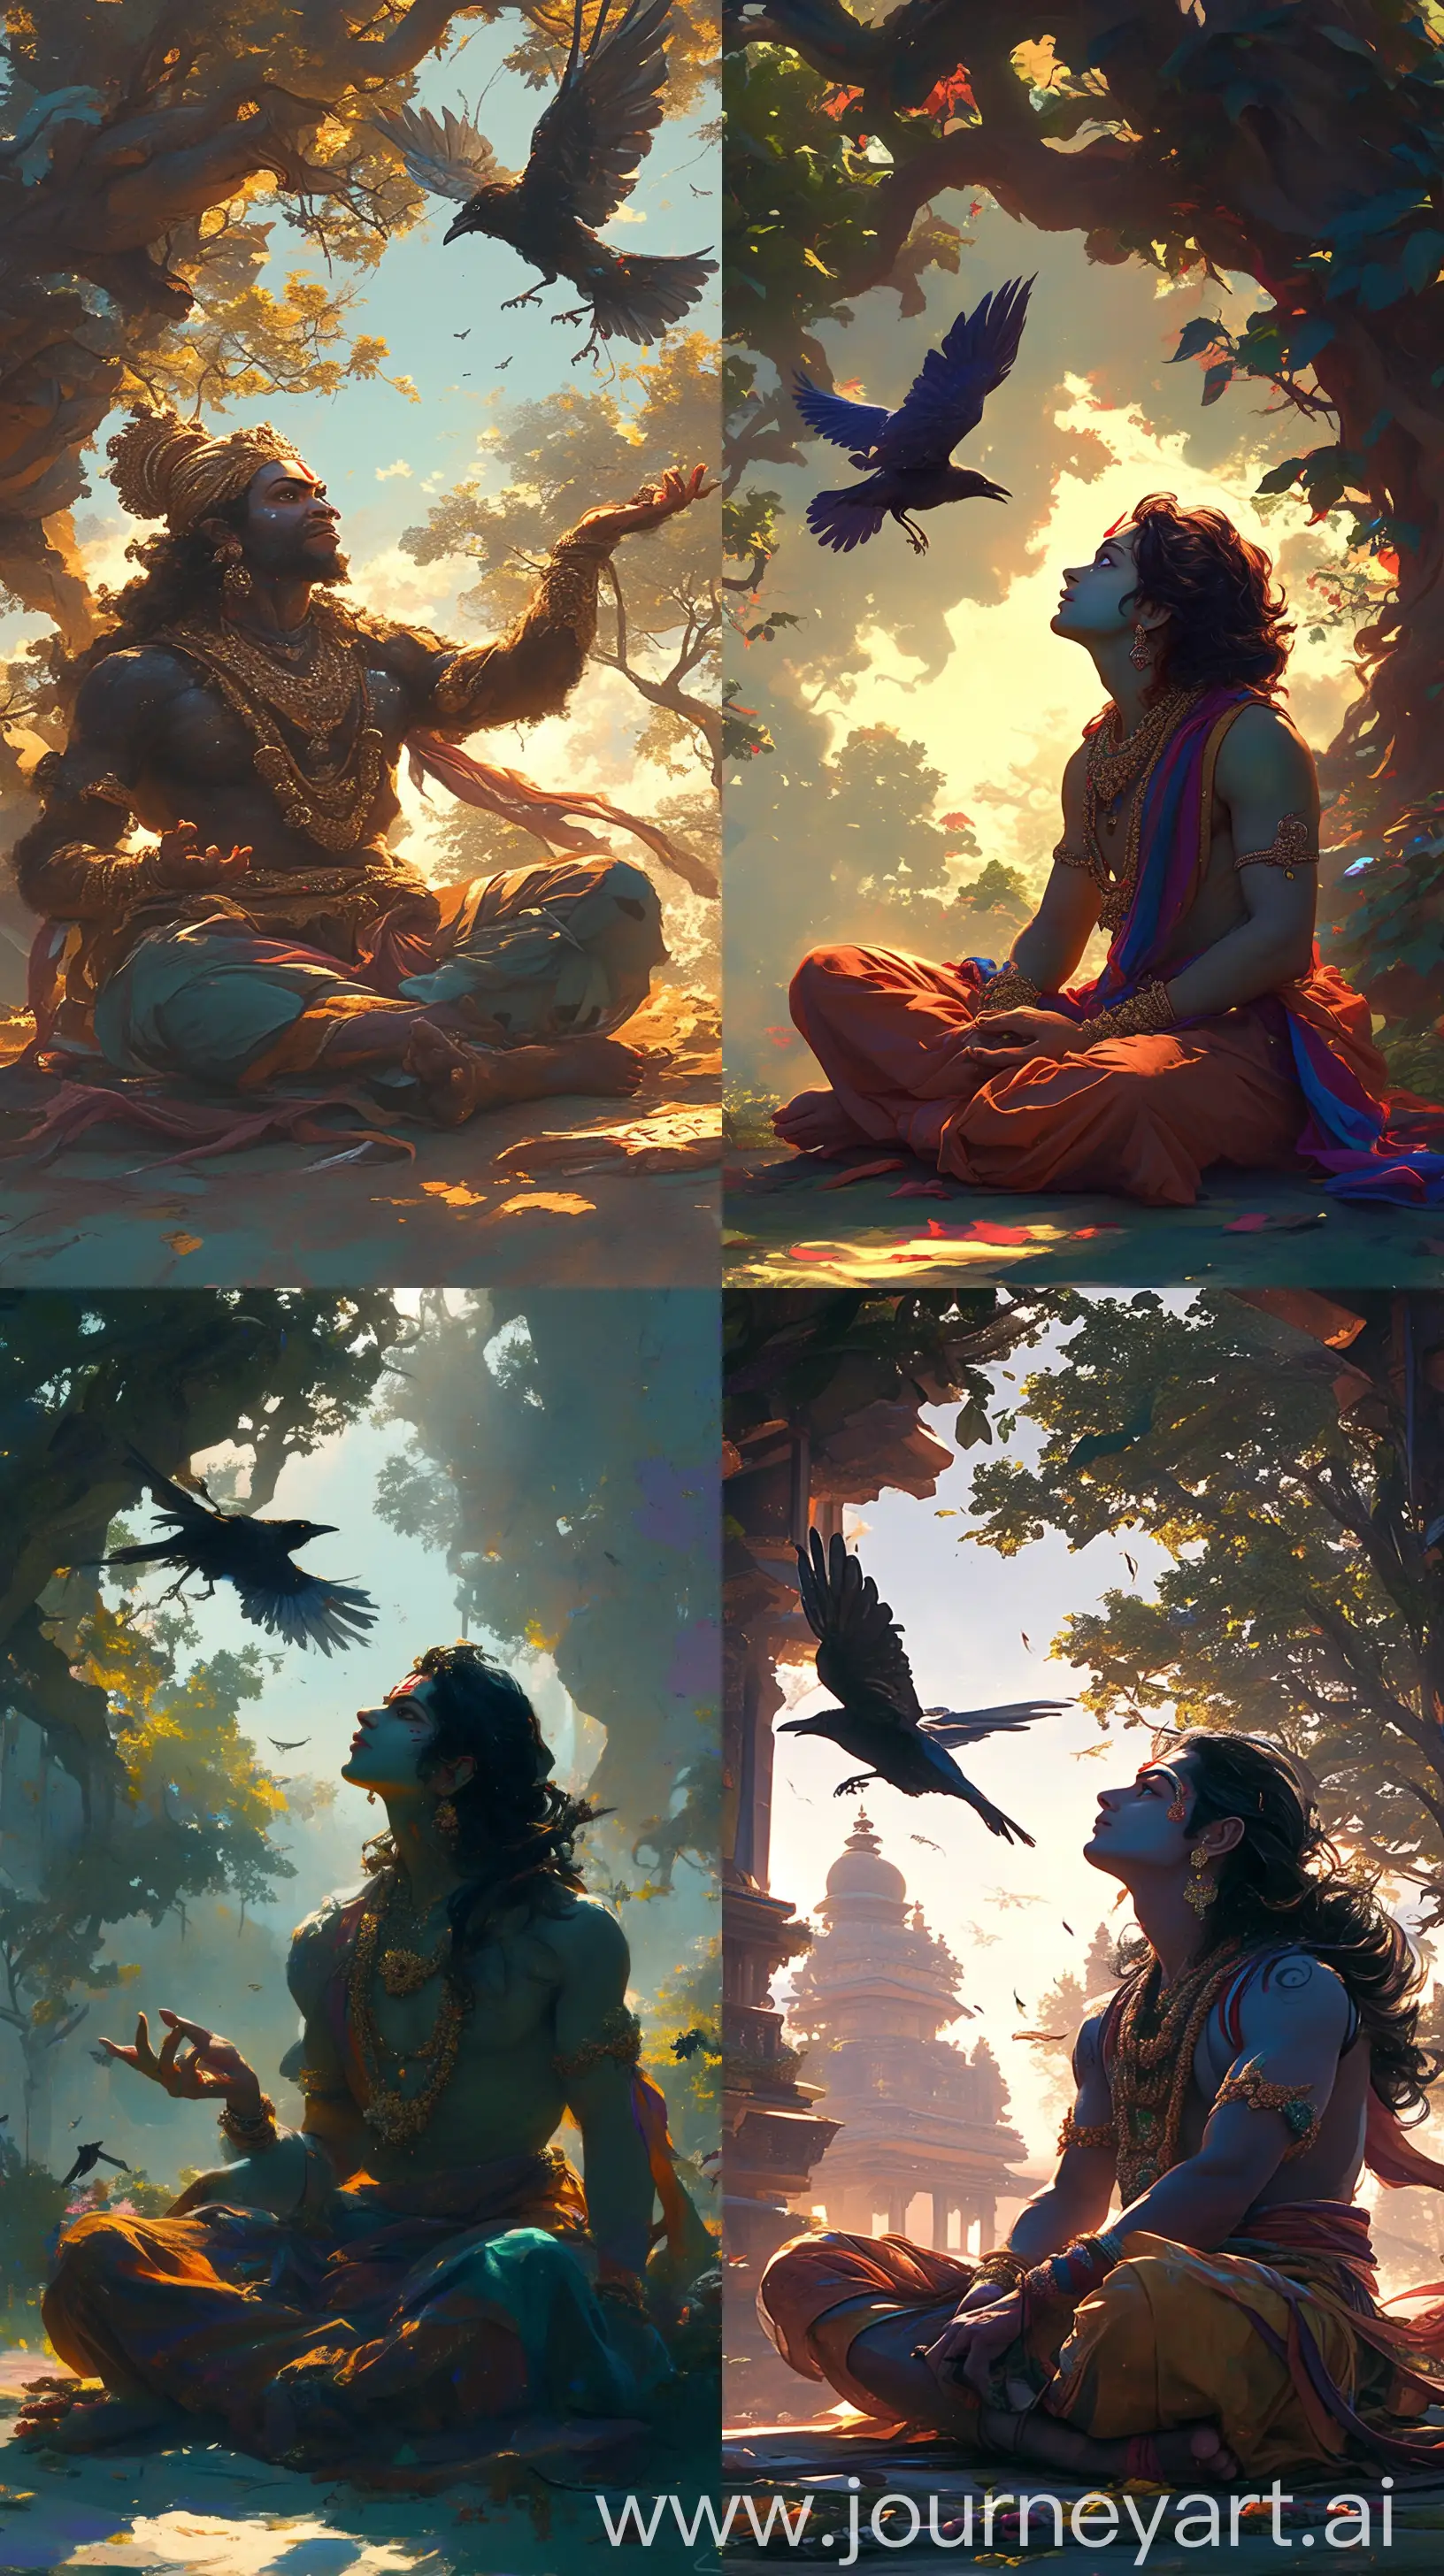 Lord Ram depicted with intricate details, seated in the ground, eyes wide open, ancient Hindu attire, looking at a crow flying over his head, morning light filtering through trees, ethereal ambiance, traditional Indian art style --s 300 --ar 9:16 --niji 6